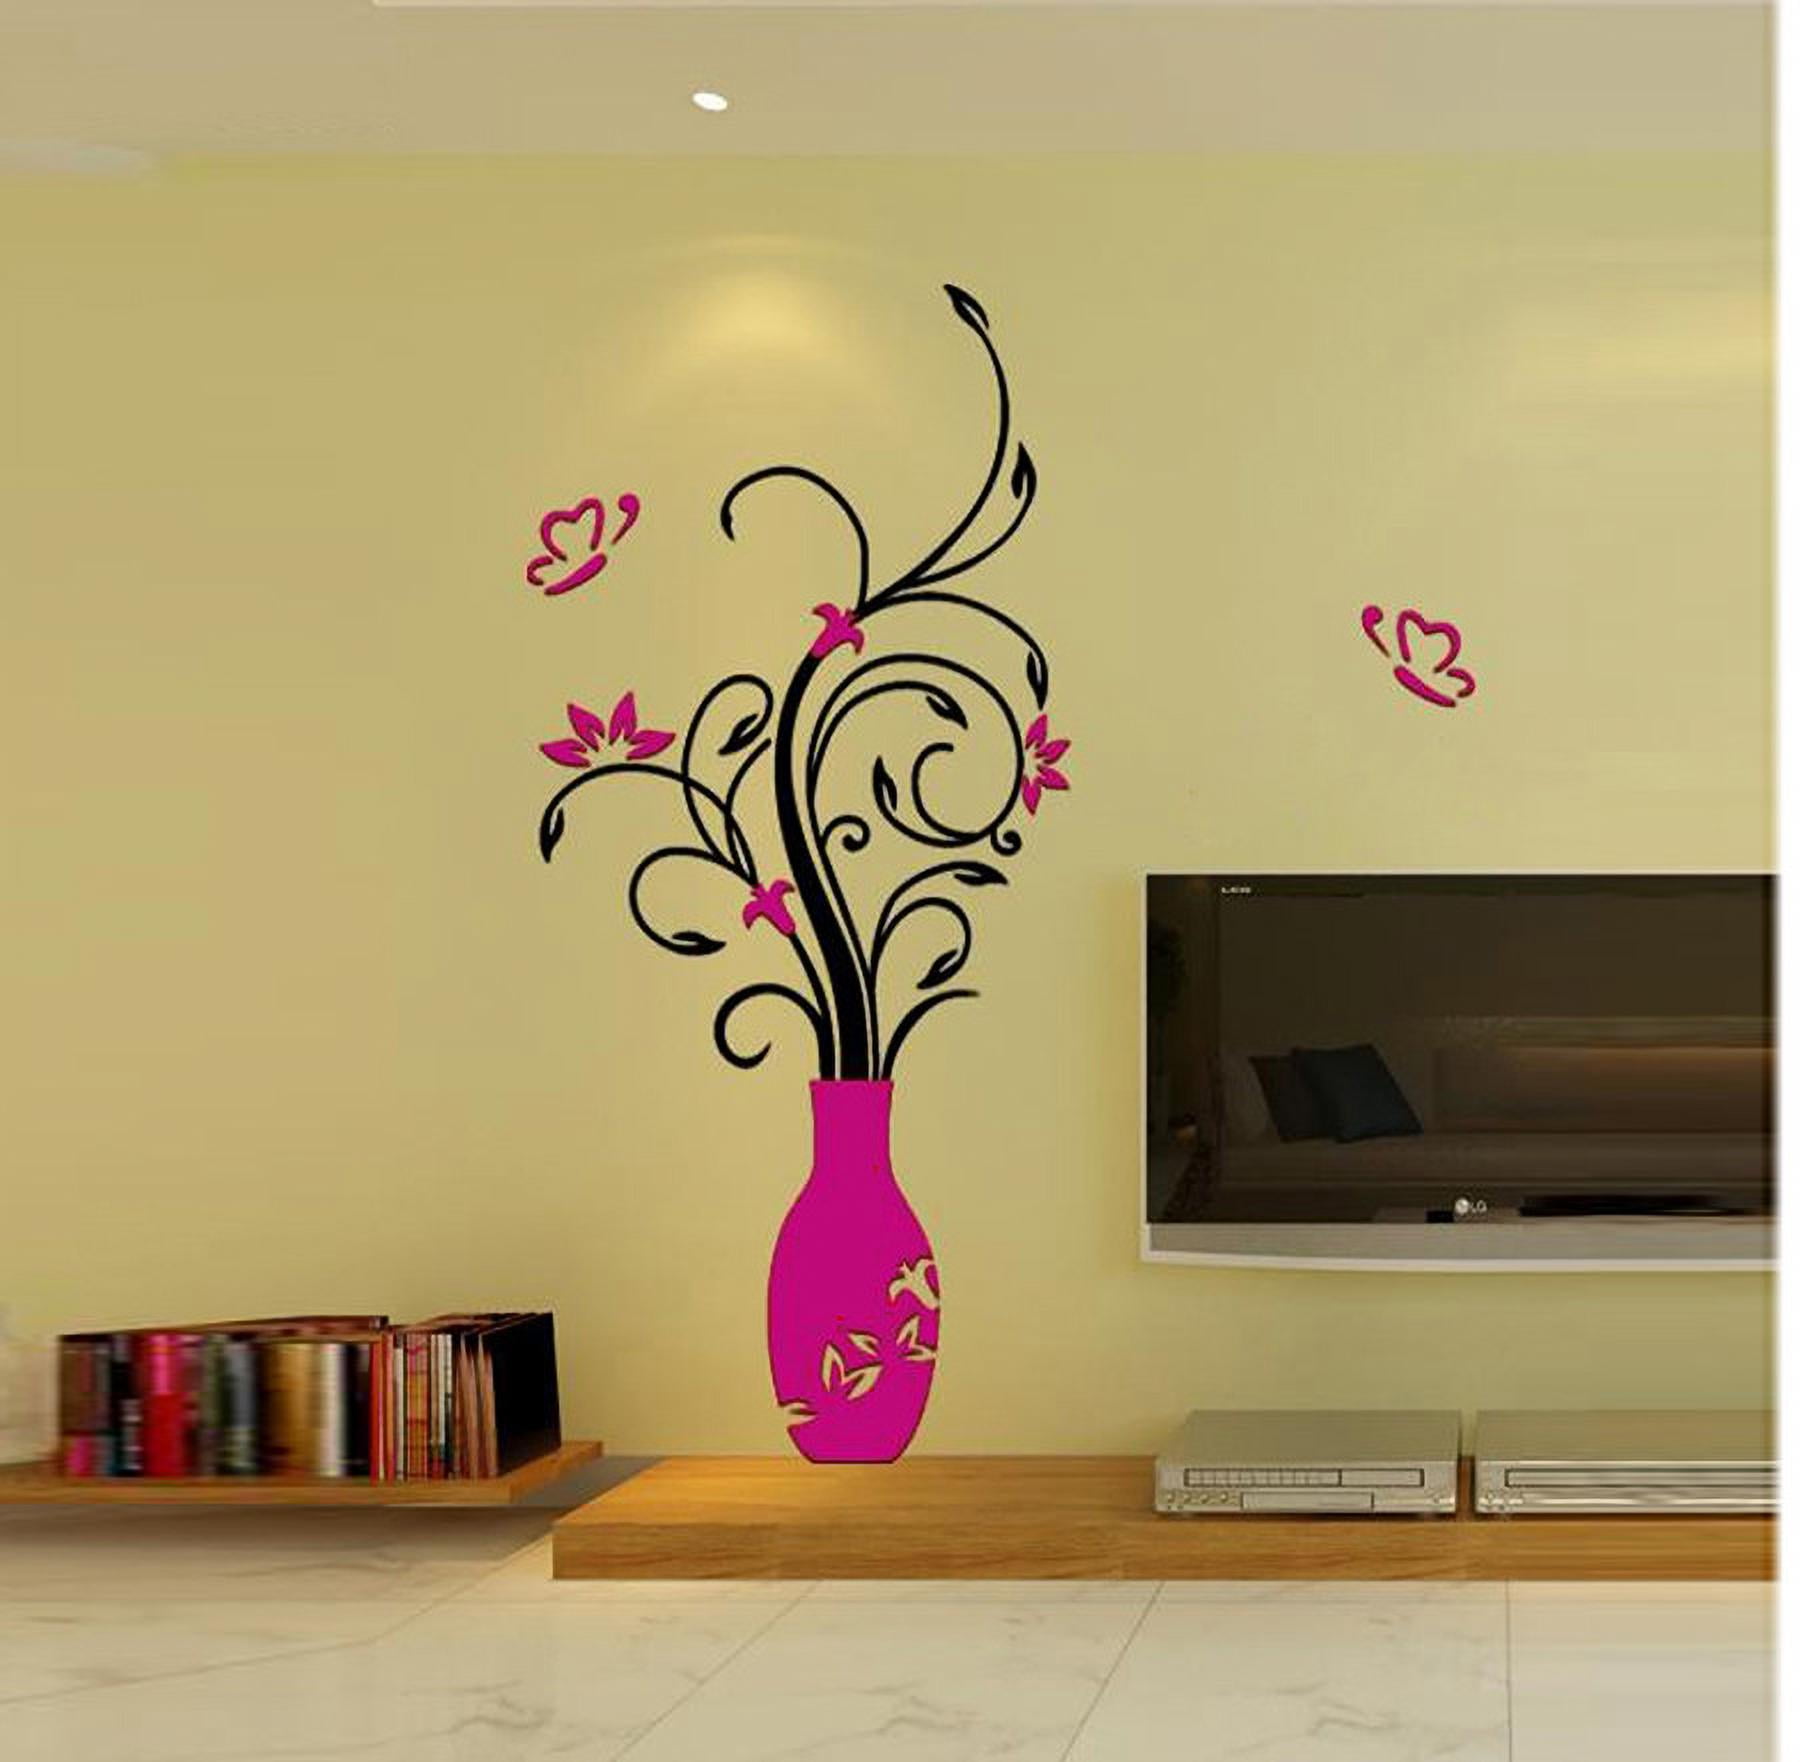 Details about   NEW Cherry Blossom Wall Decal Pink Flower Tree Wall Decal For Home DIY Decor USA